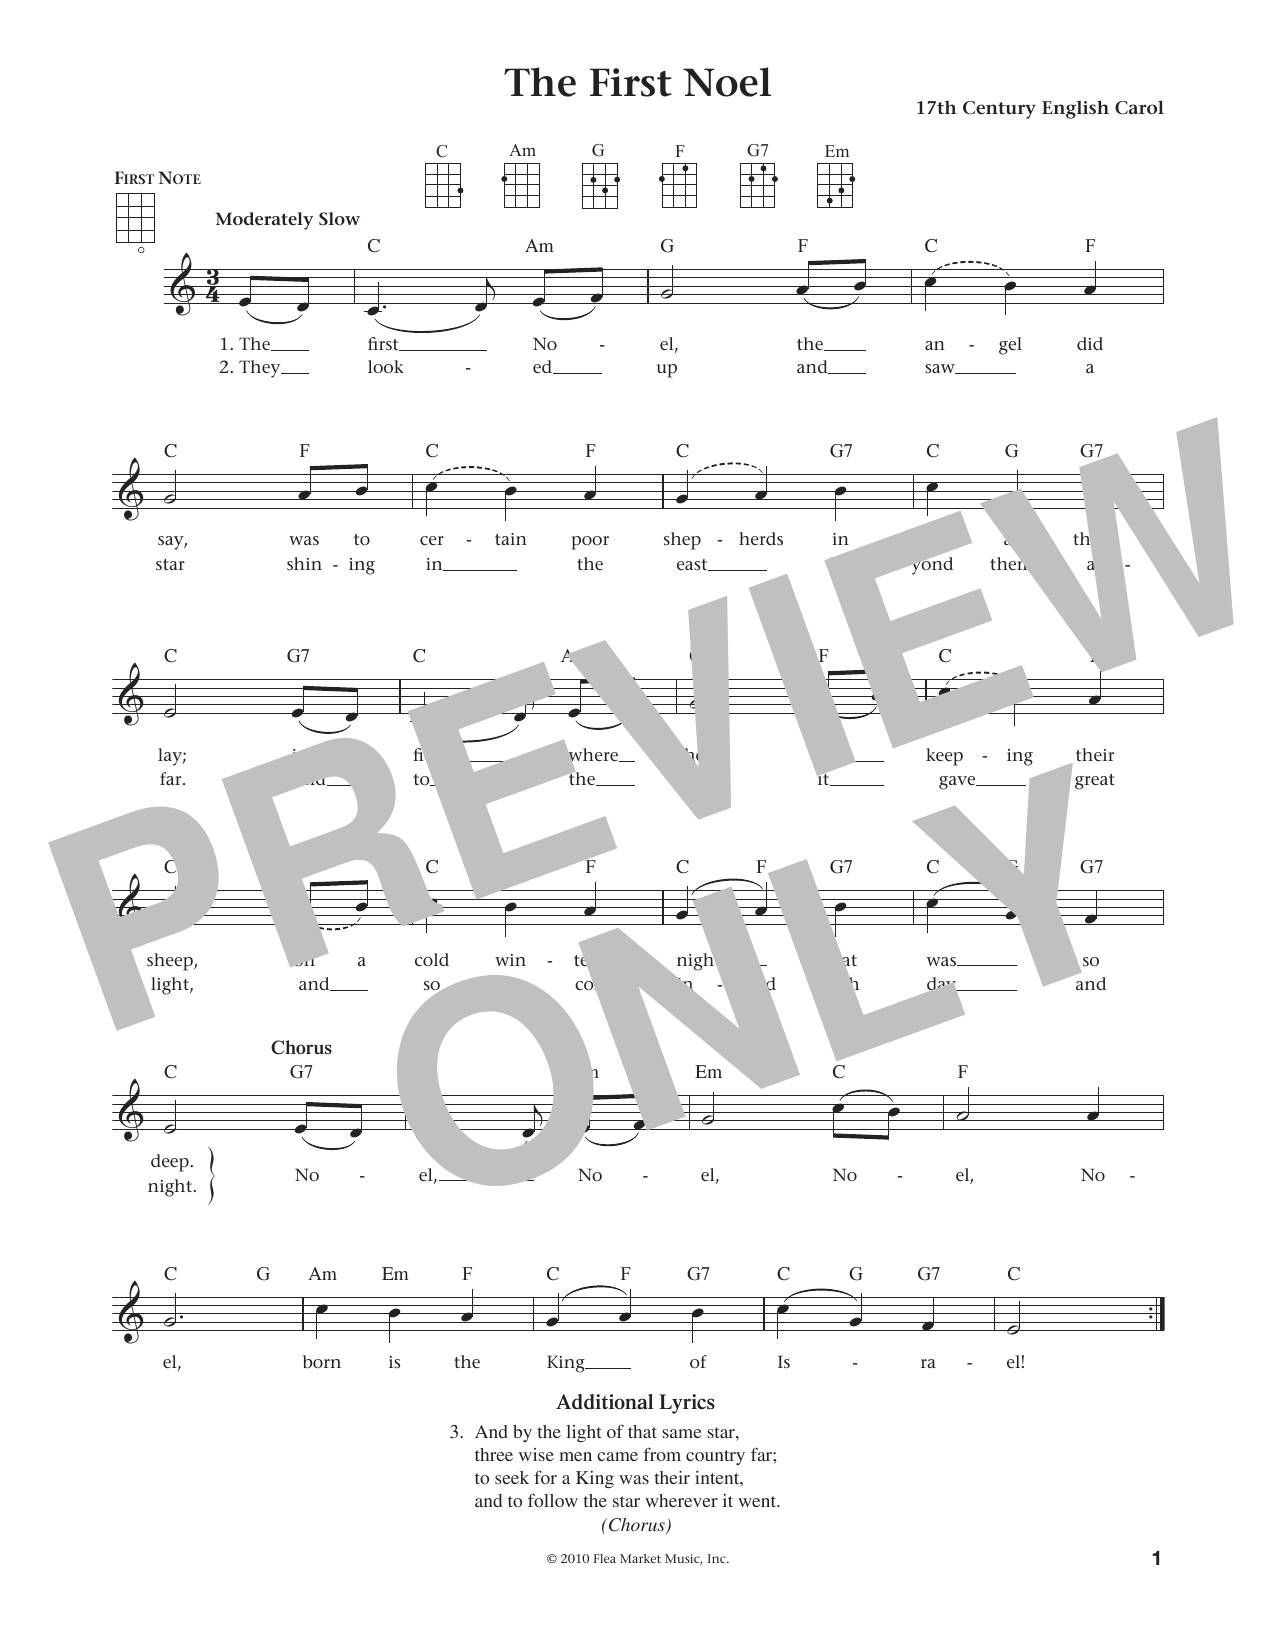 Download 17th Century English Carol The First Noel (from The Daily Ukulele) Sheet Music